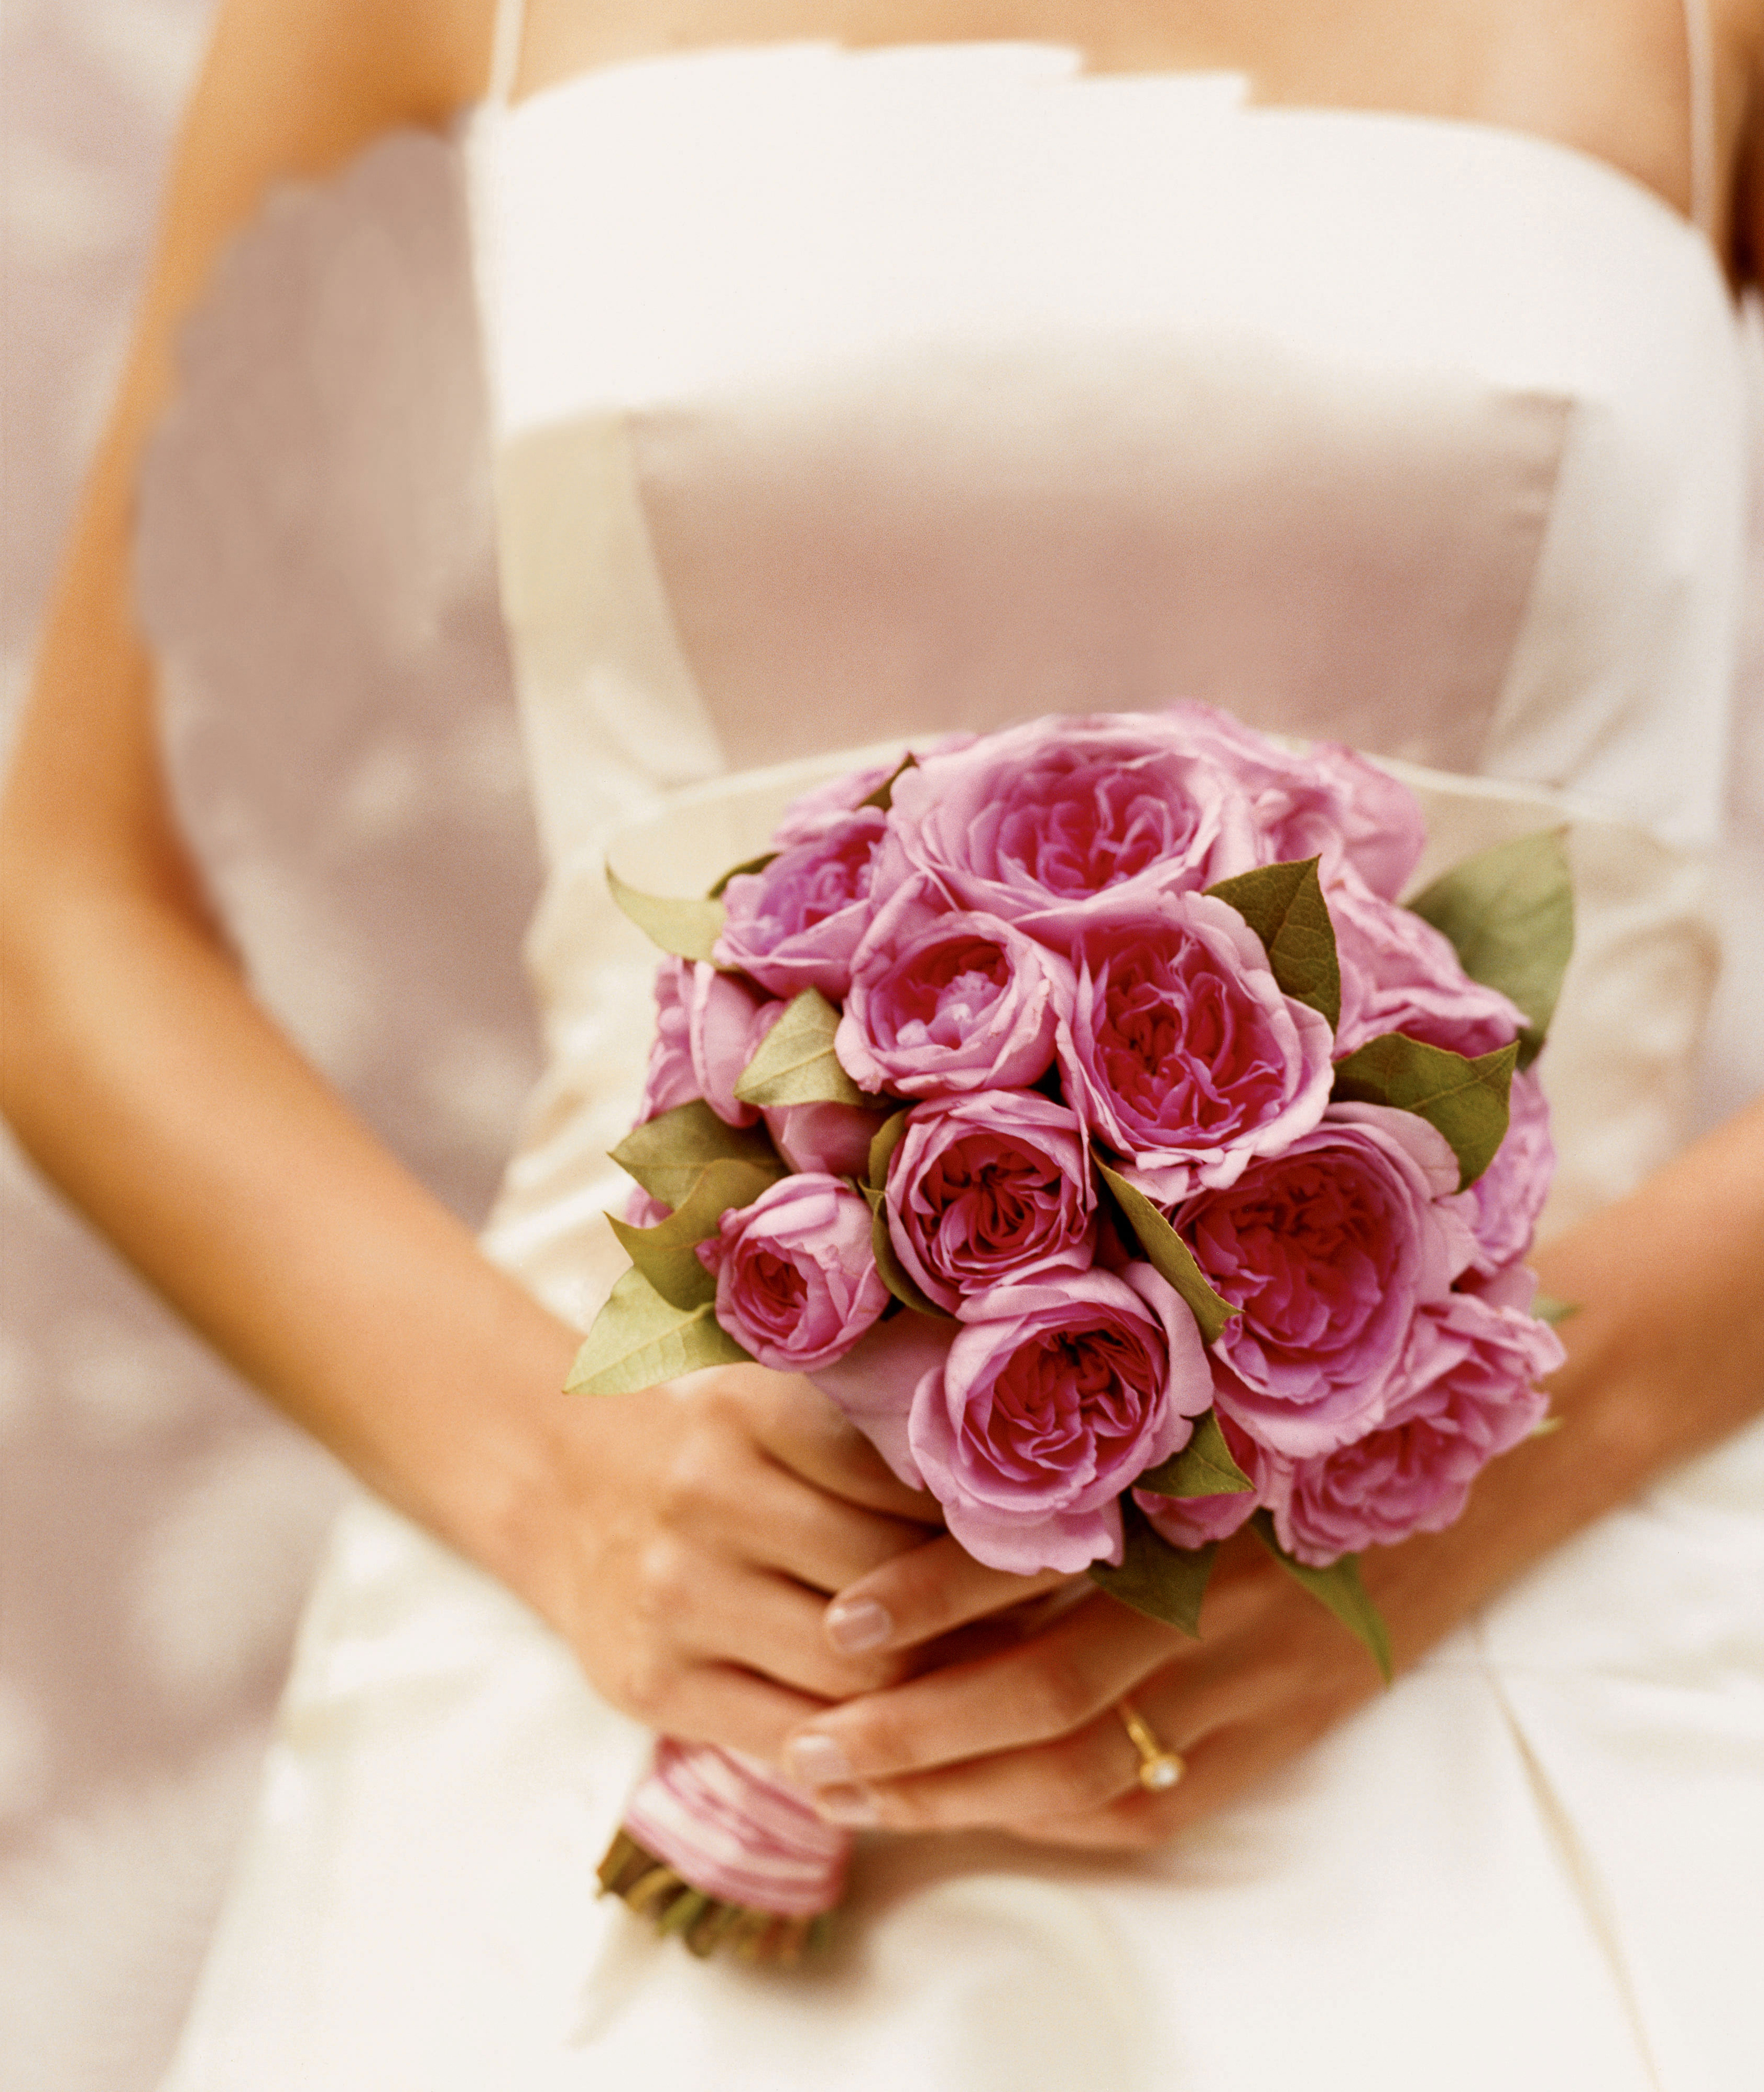 How to Make a Bridal Bouquet